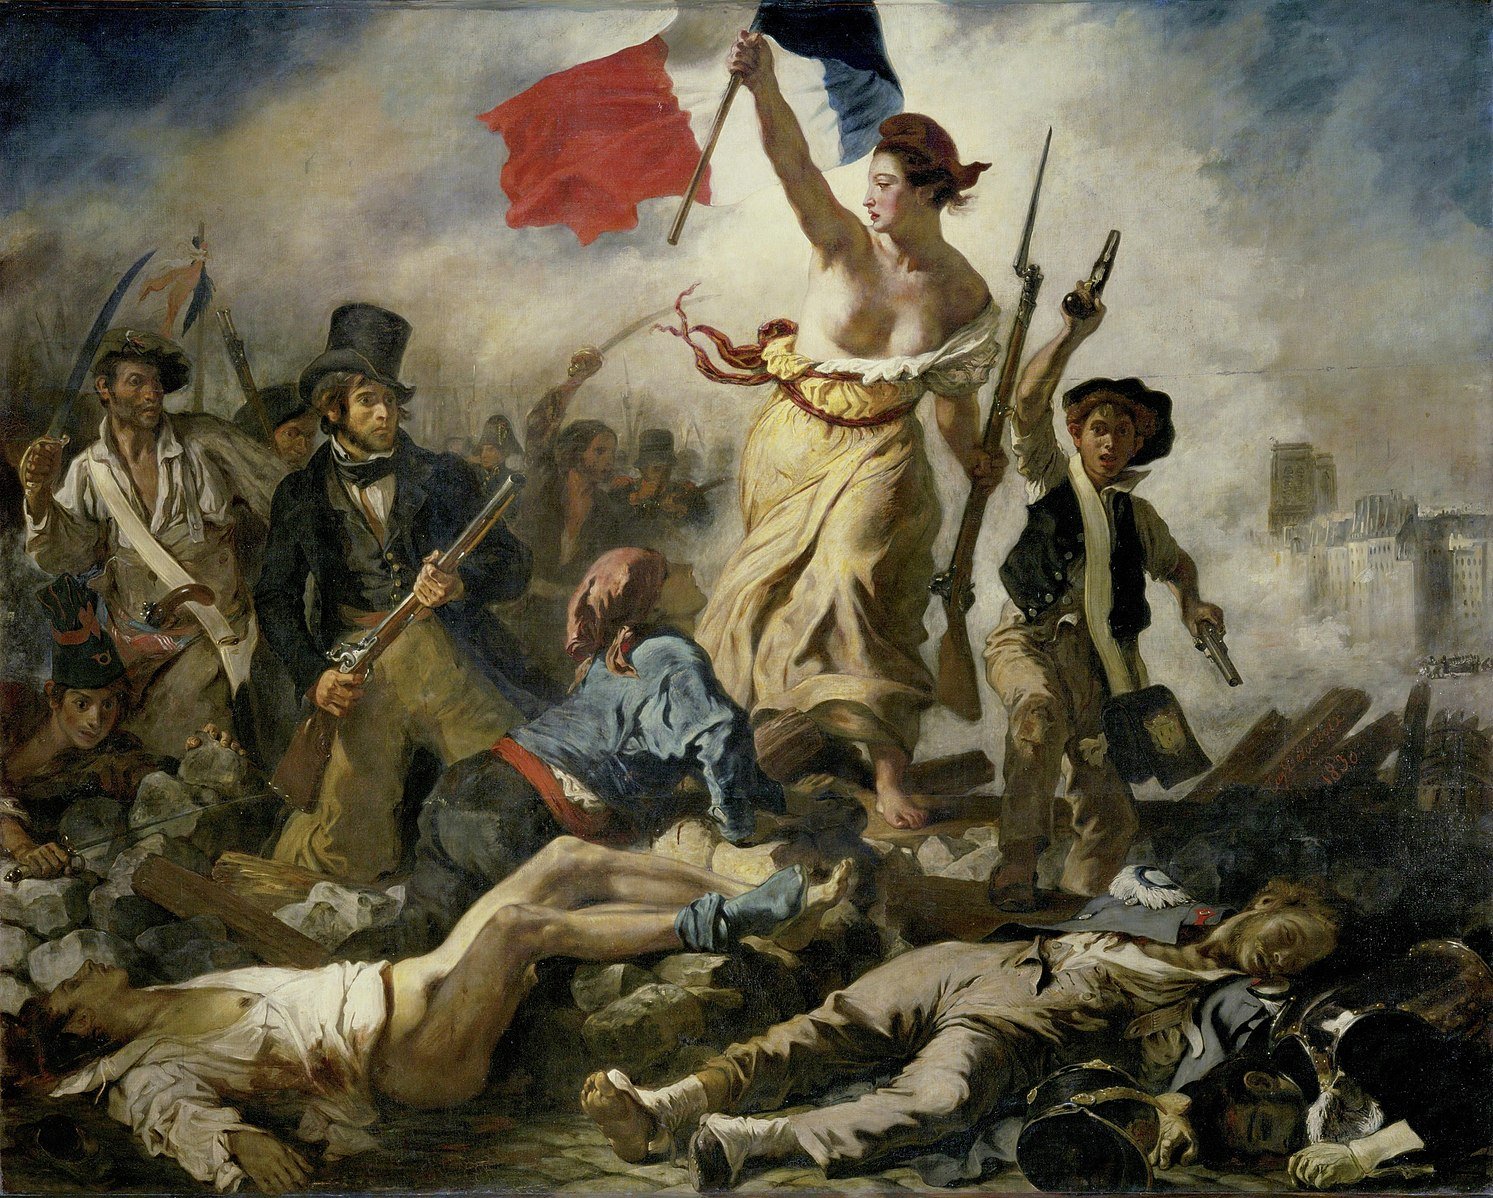 Liberty Leading the People by Eugène Delacroix. 1830.